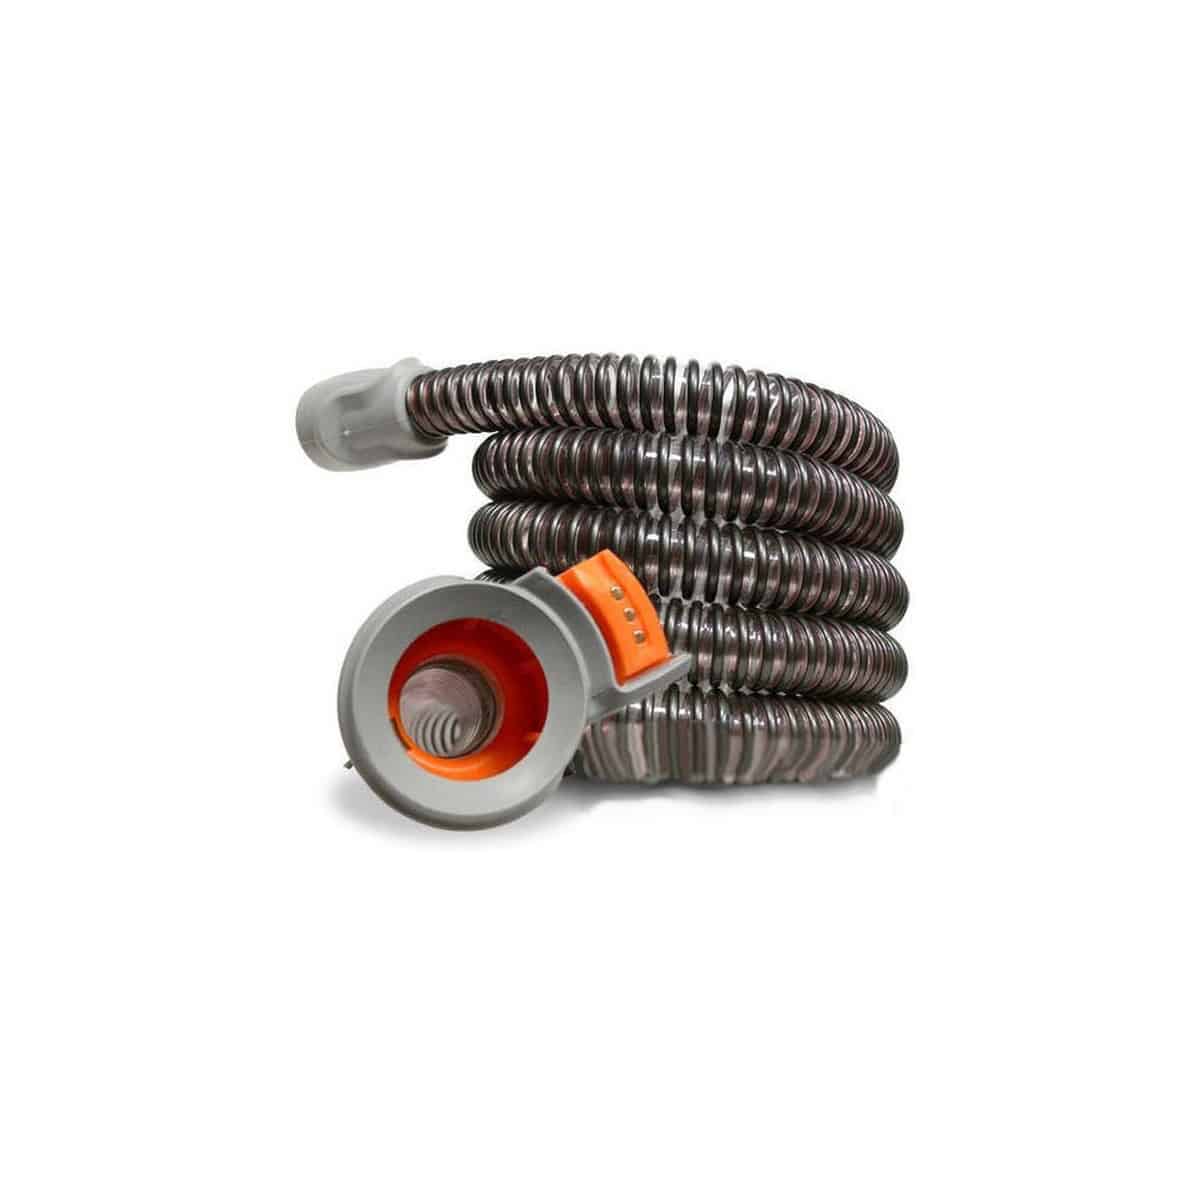 Featured image for “ResMed S9 - Climateline Heated Tubing (fits S9 CPAP machines)”